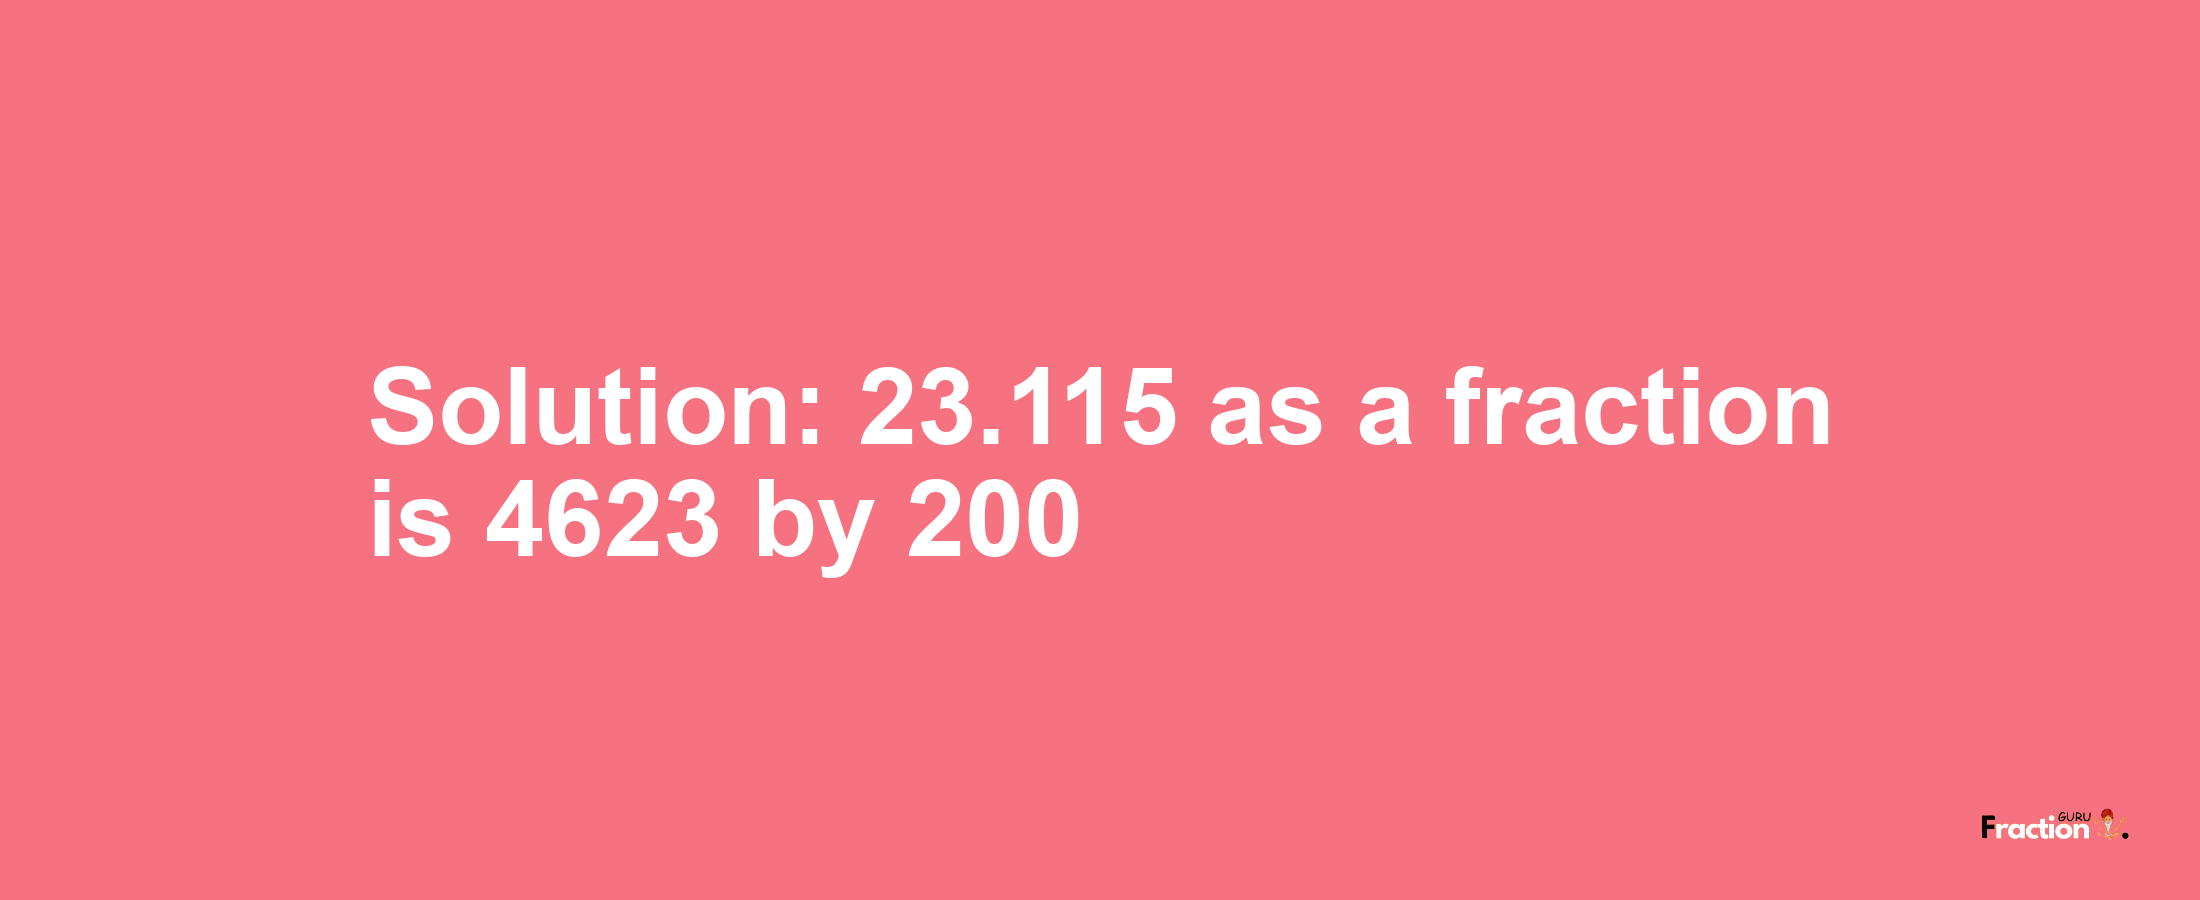 Solution:23.115 as a fraction is 4623/200